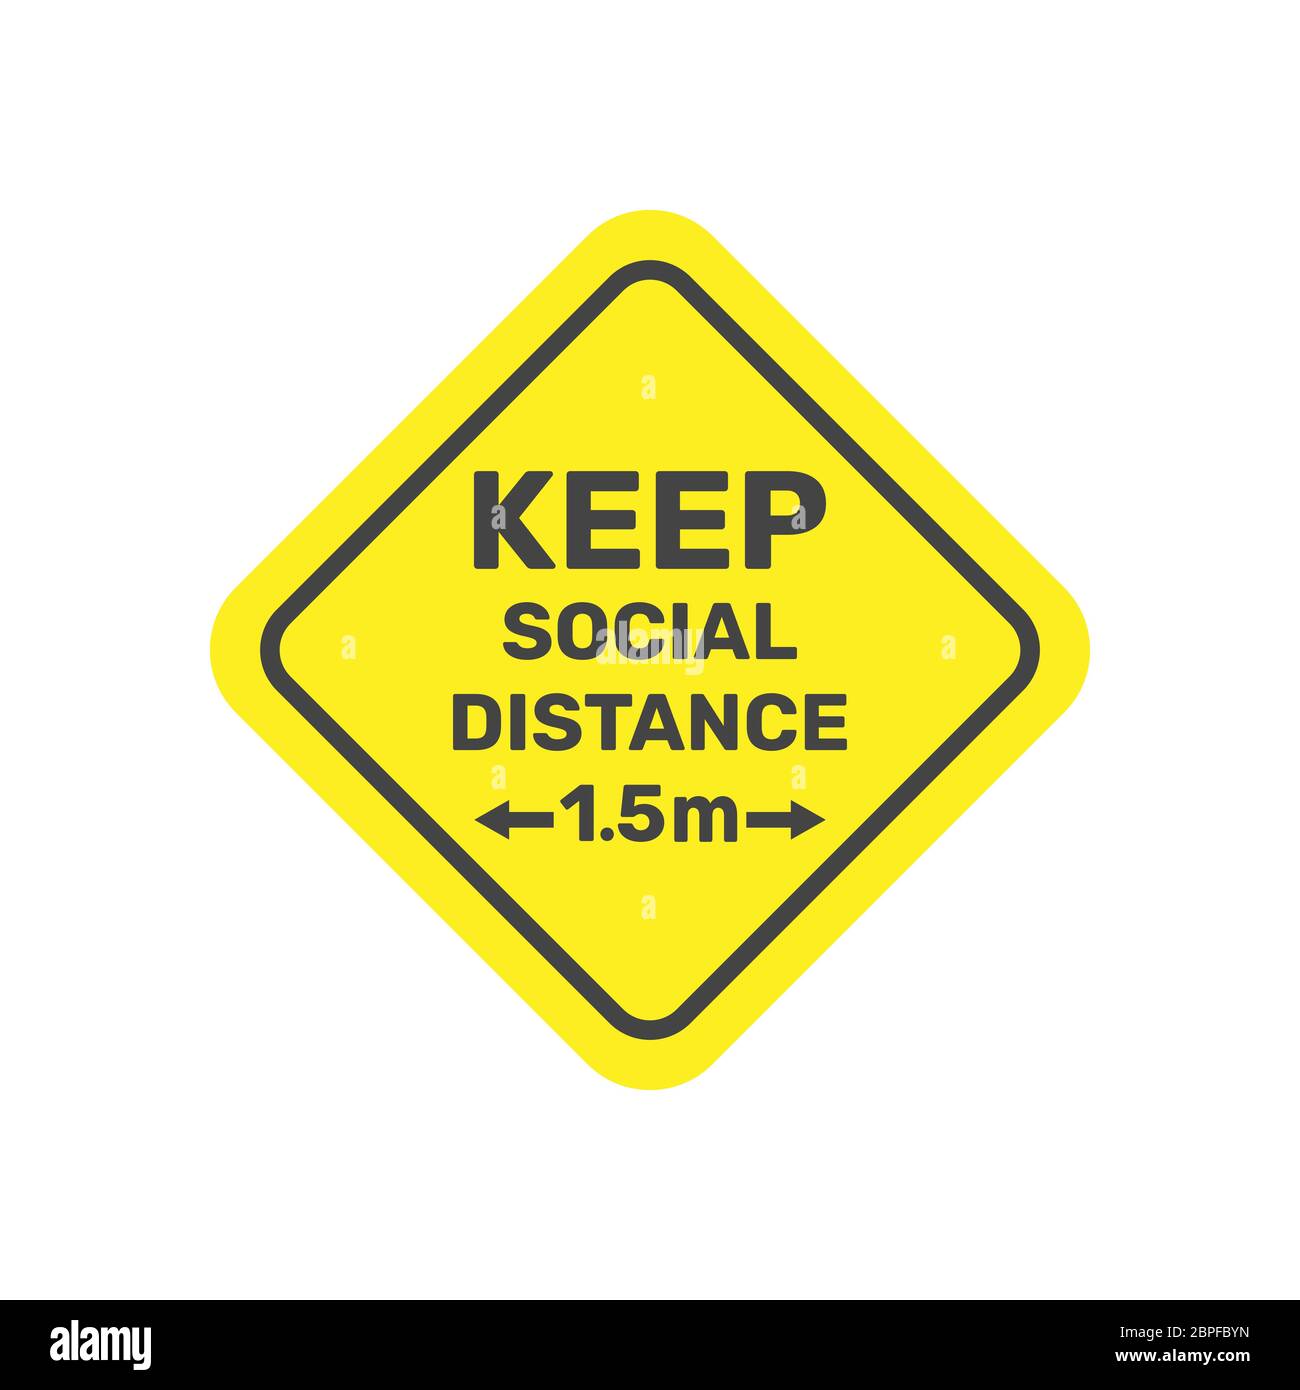 Social distancing icon vector 1.5 metres distance. Quarantine measures. Warning sign. EPS 10 Stock Vector